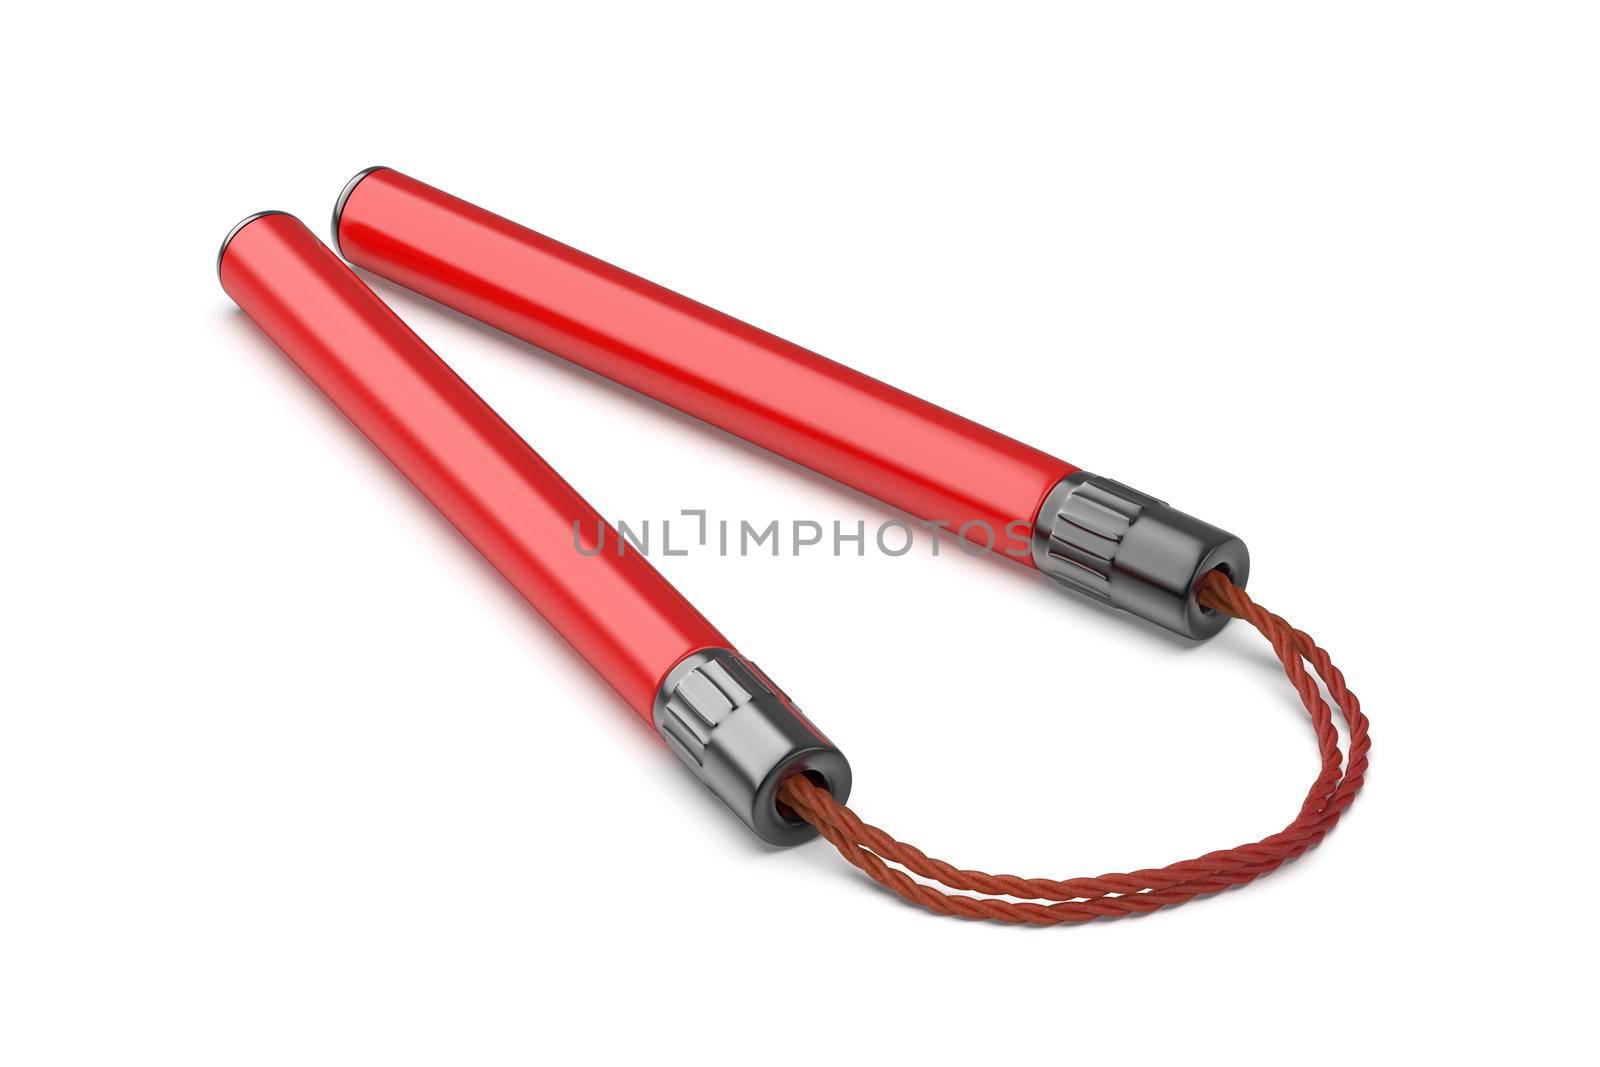 Red nunchaku with cord on white background